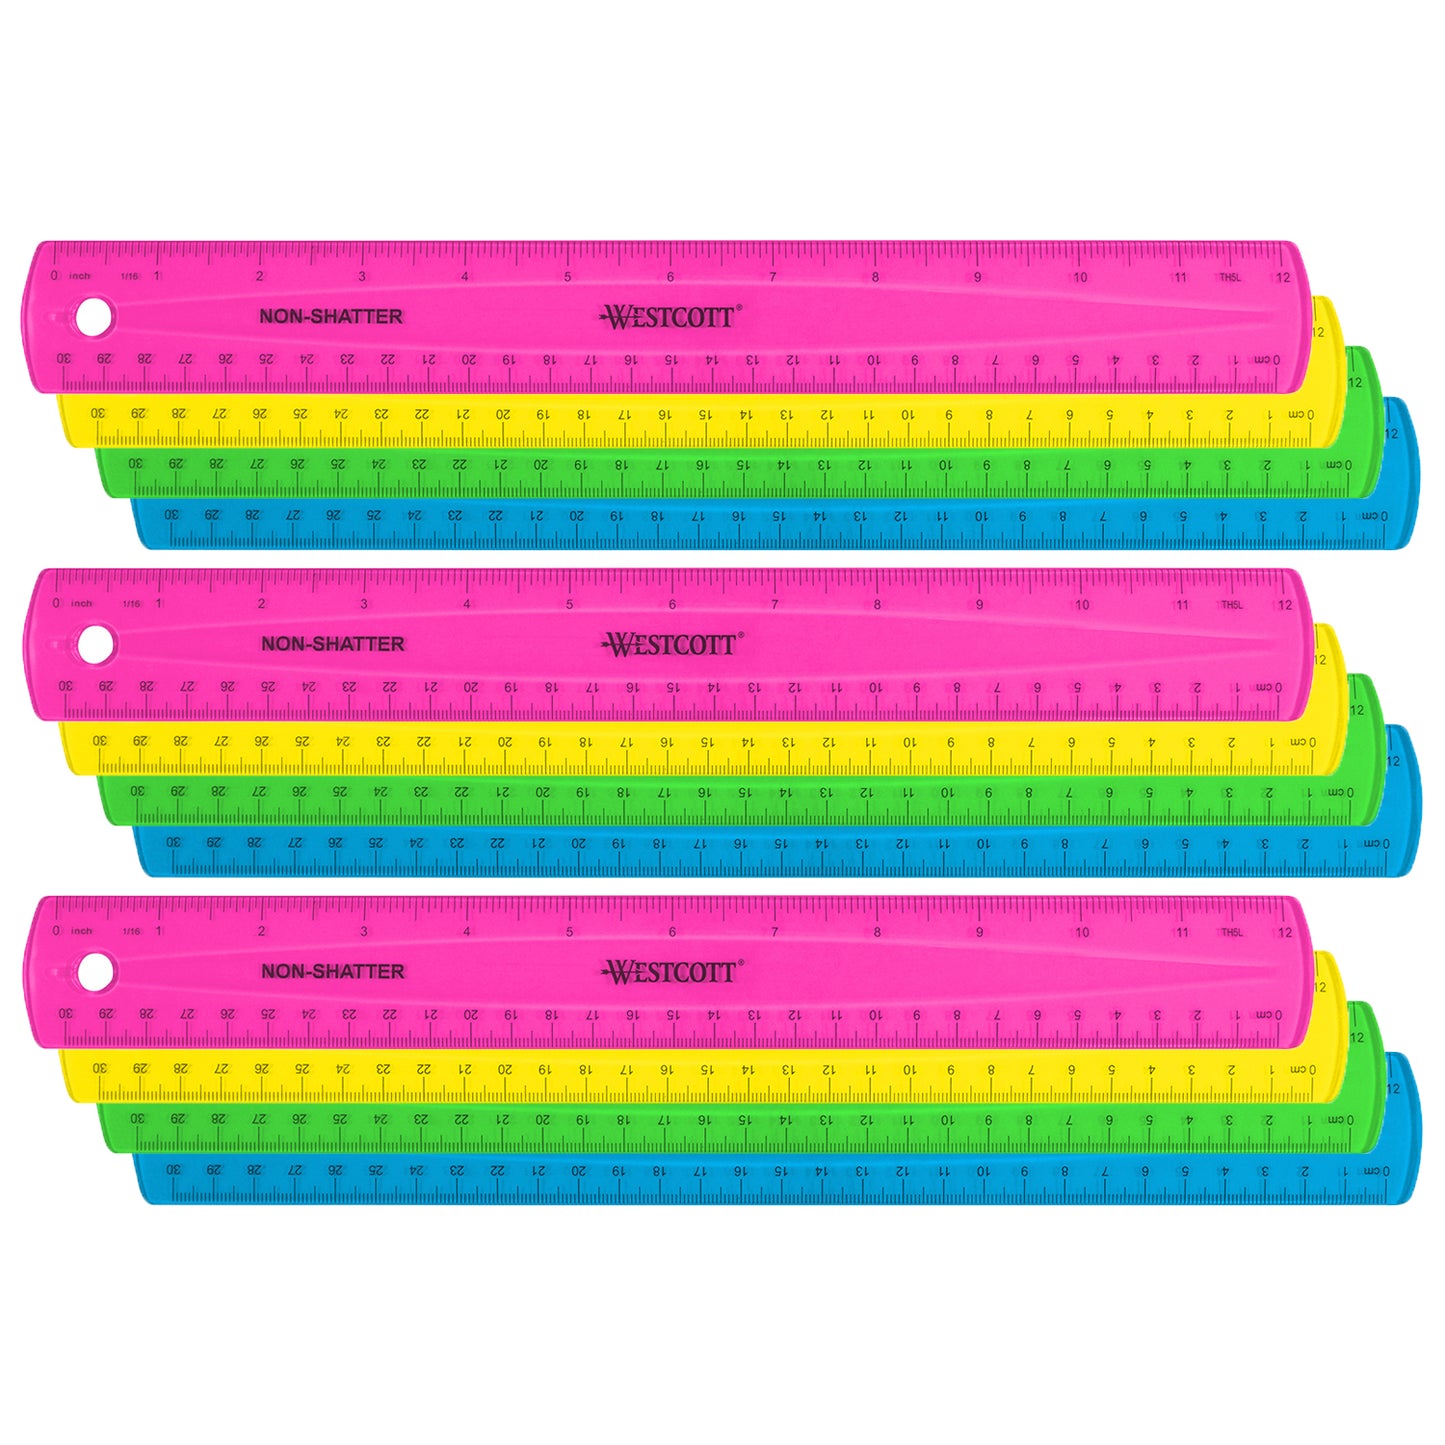 12" Shatterproof Ruler with Anti-Microbial, Assorted Translucent Colors (No Color Choice), Pack of 12